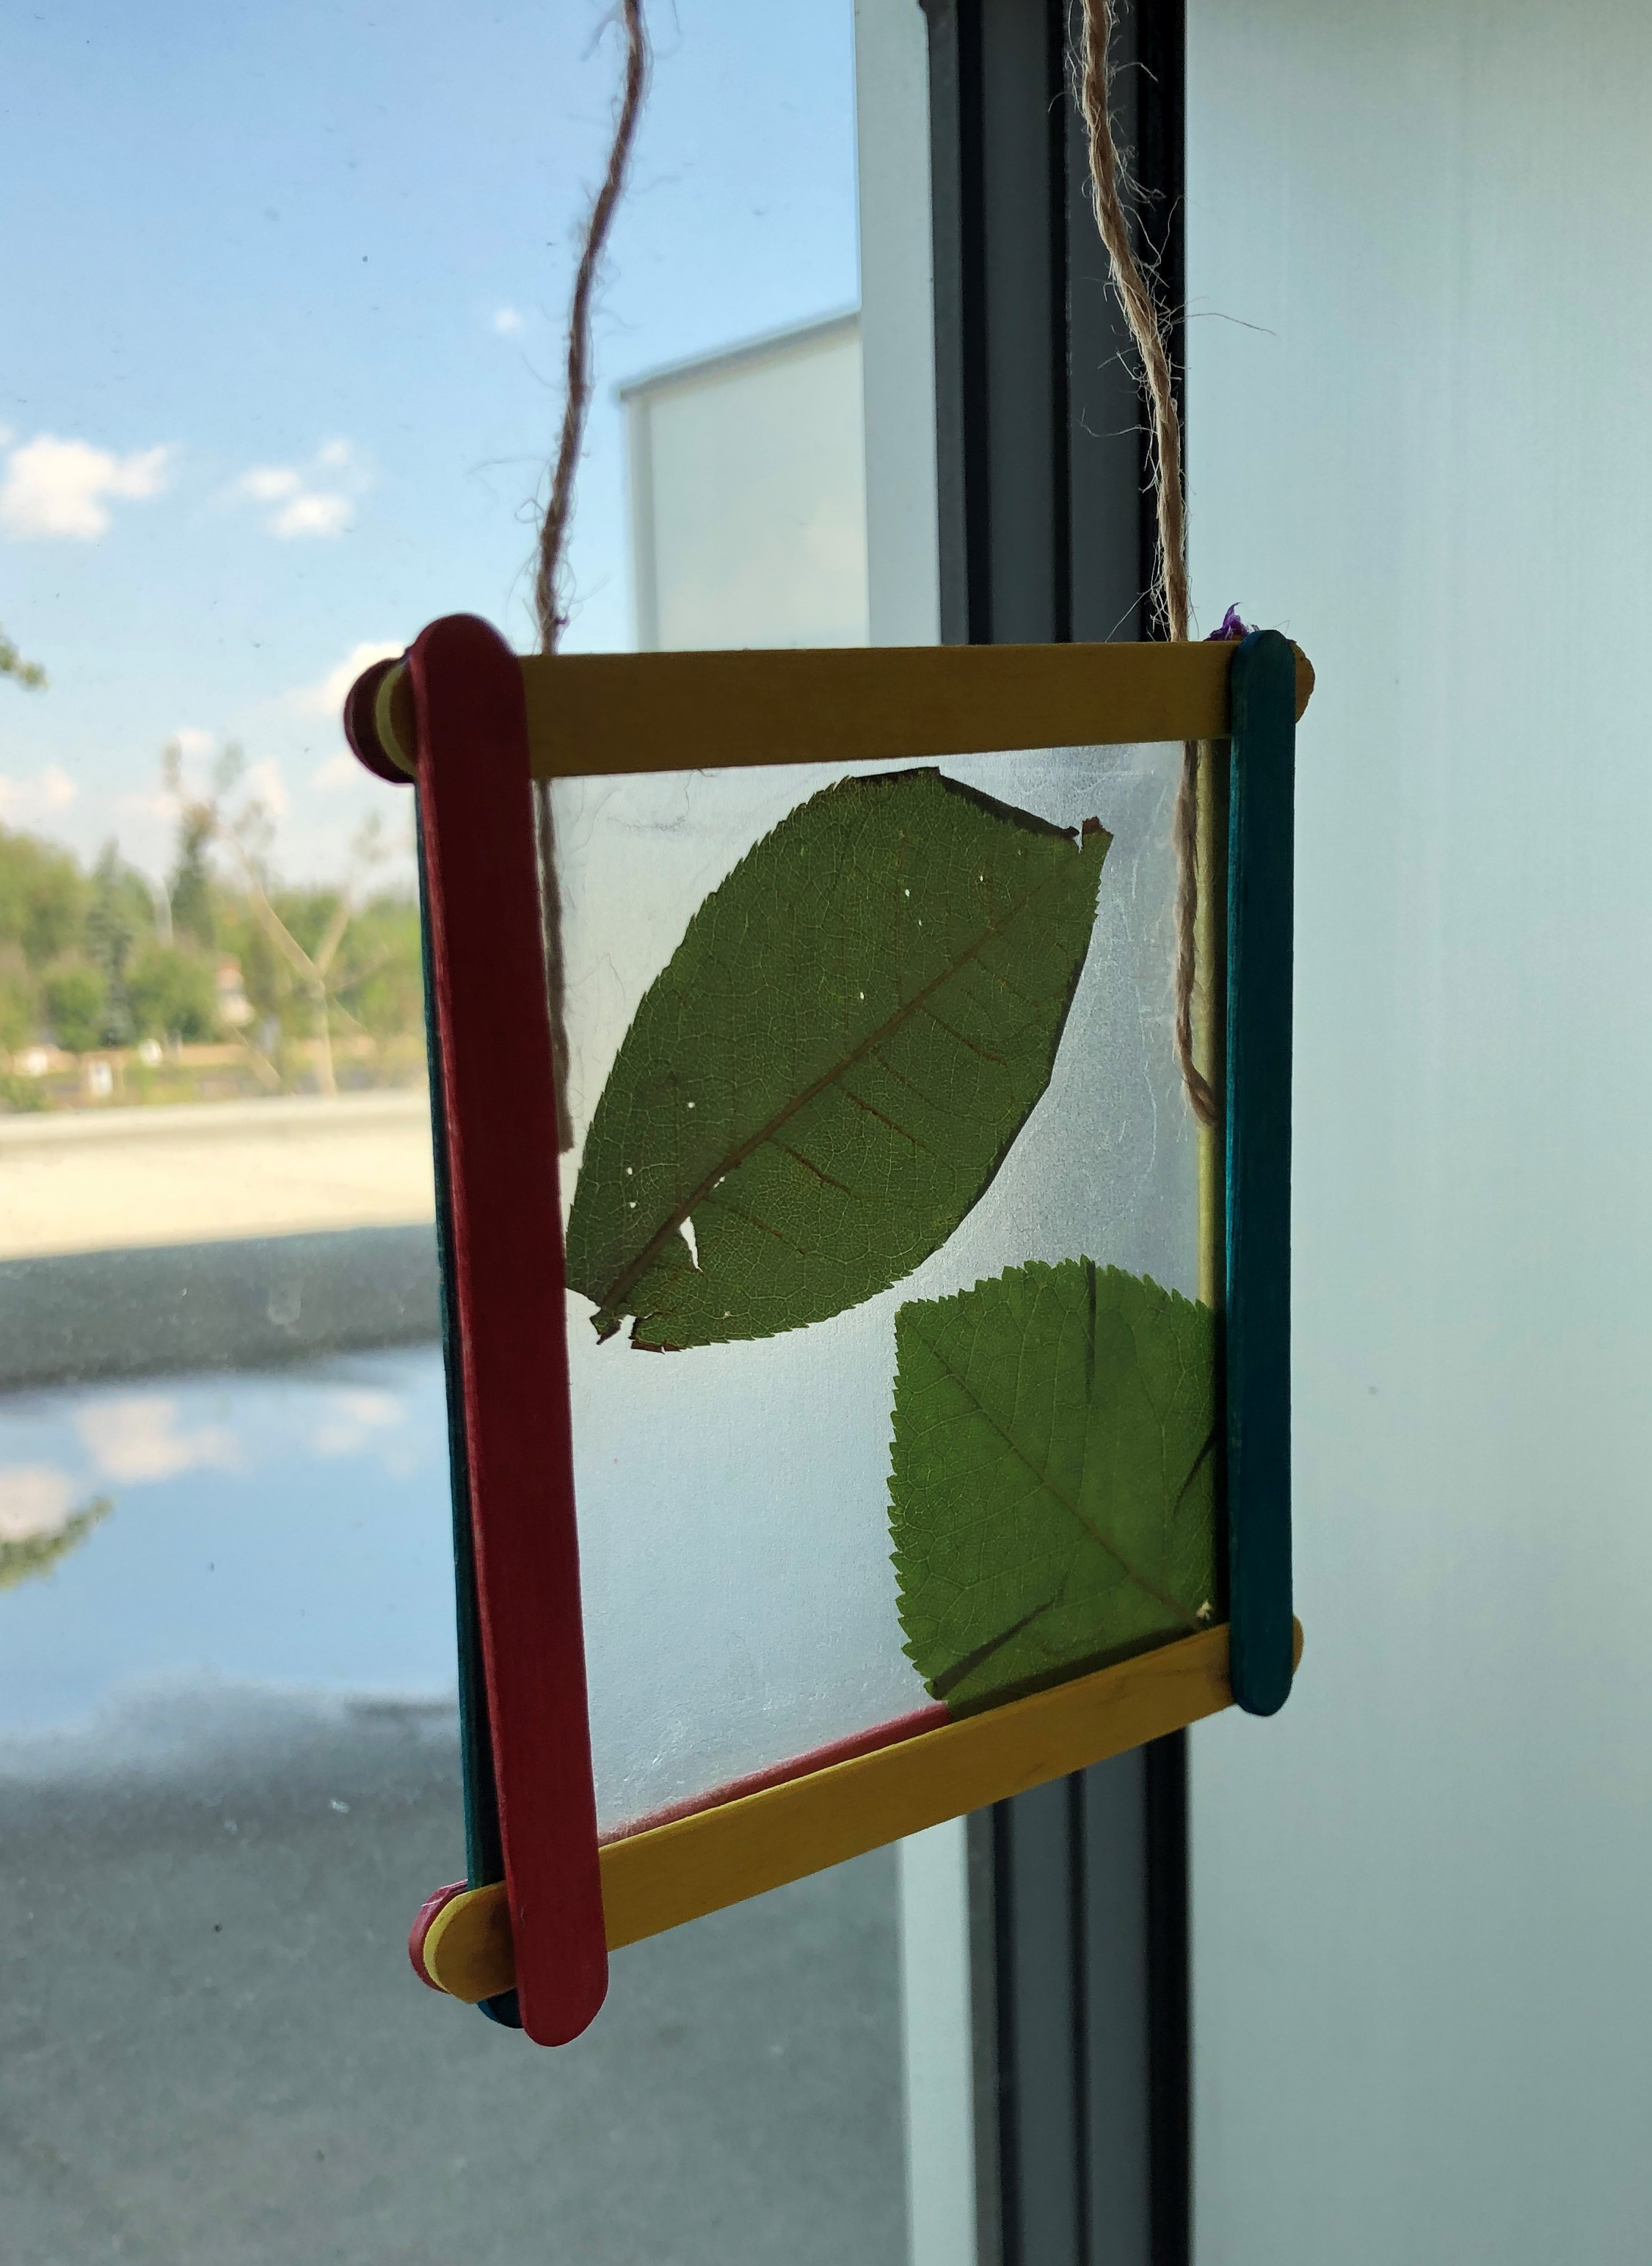 Colourful popsicle sticks and leaves in a square shape hanging by a window